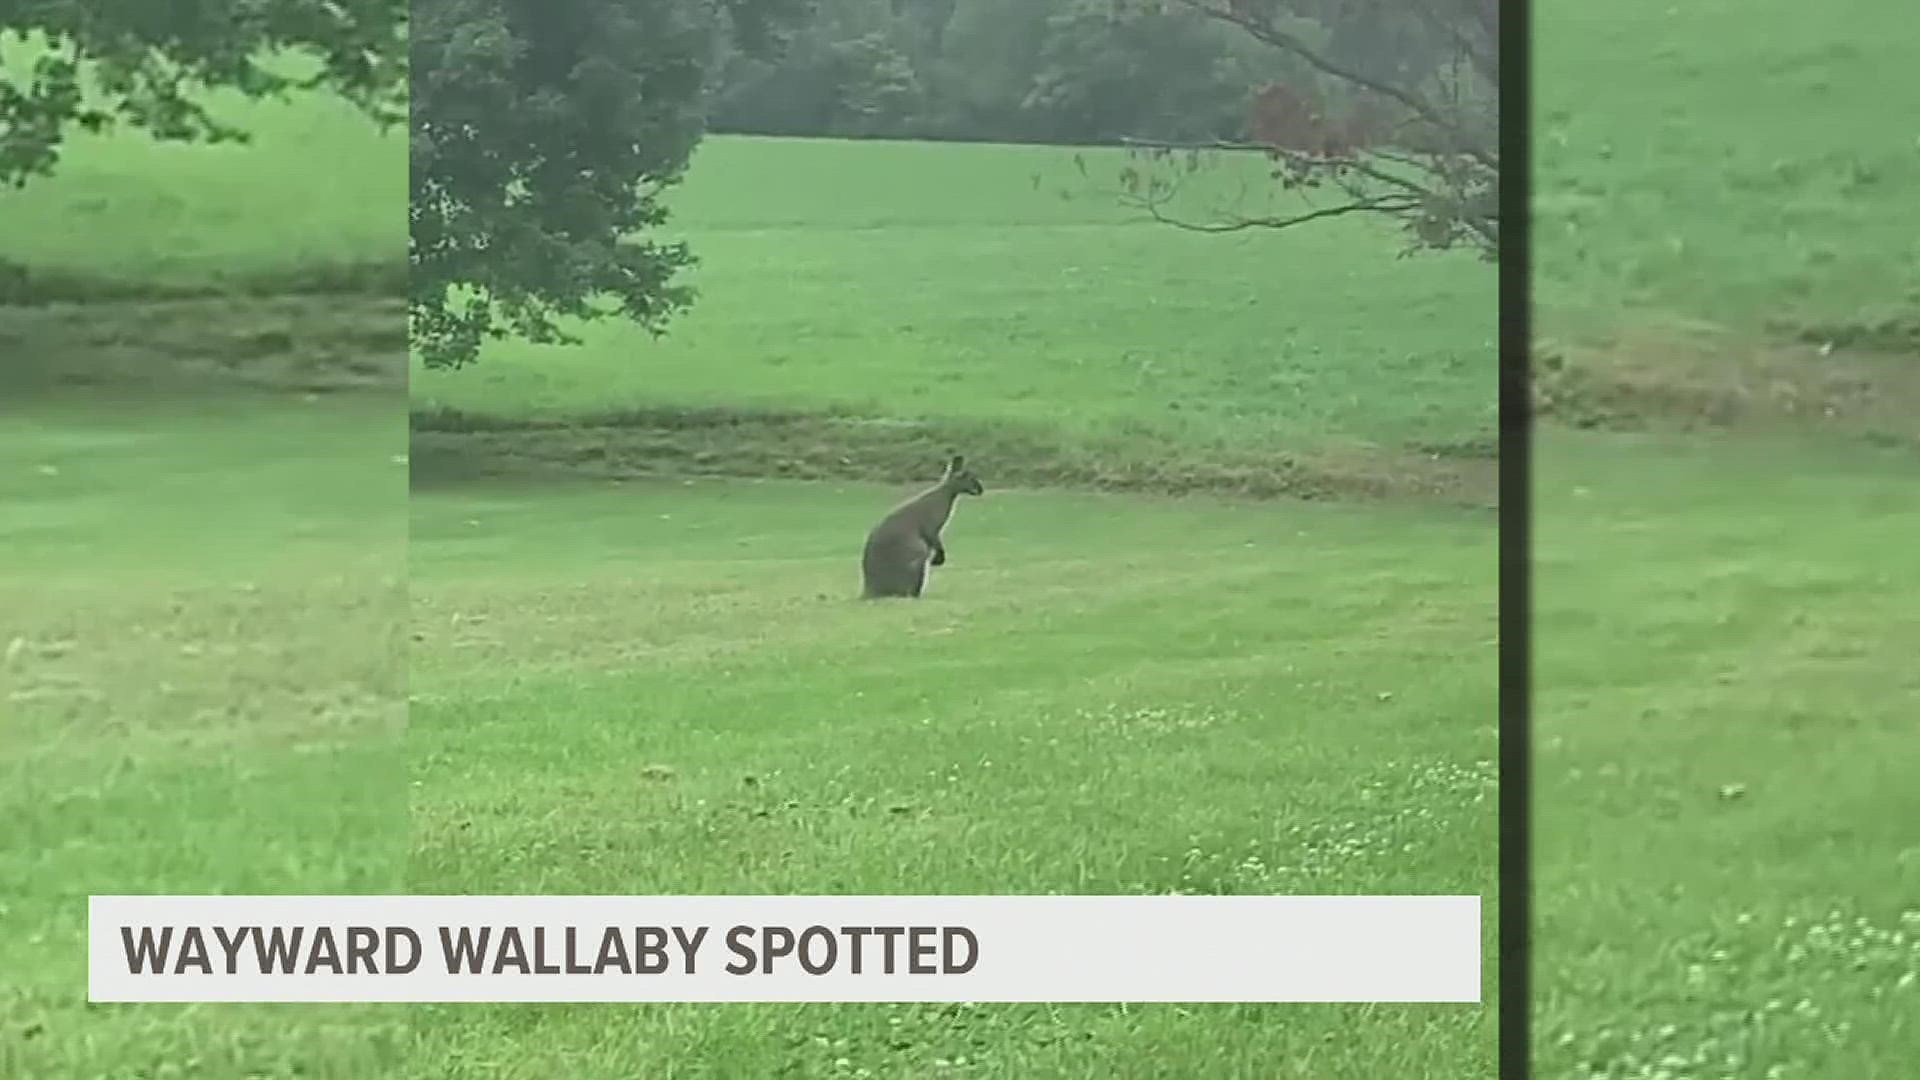 Residents in the Mount Zion area of Lebanon County have been posting pictures and videos on social media of a wayward kangaroo or wallaby spotted in the area.